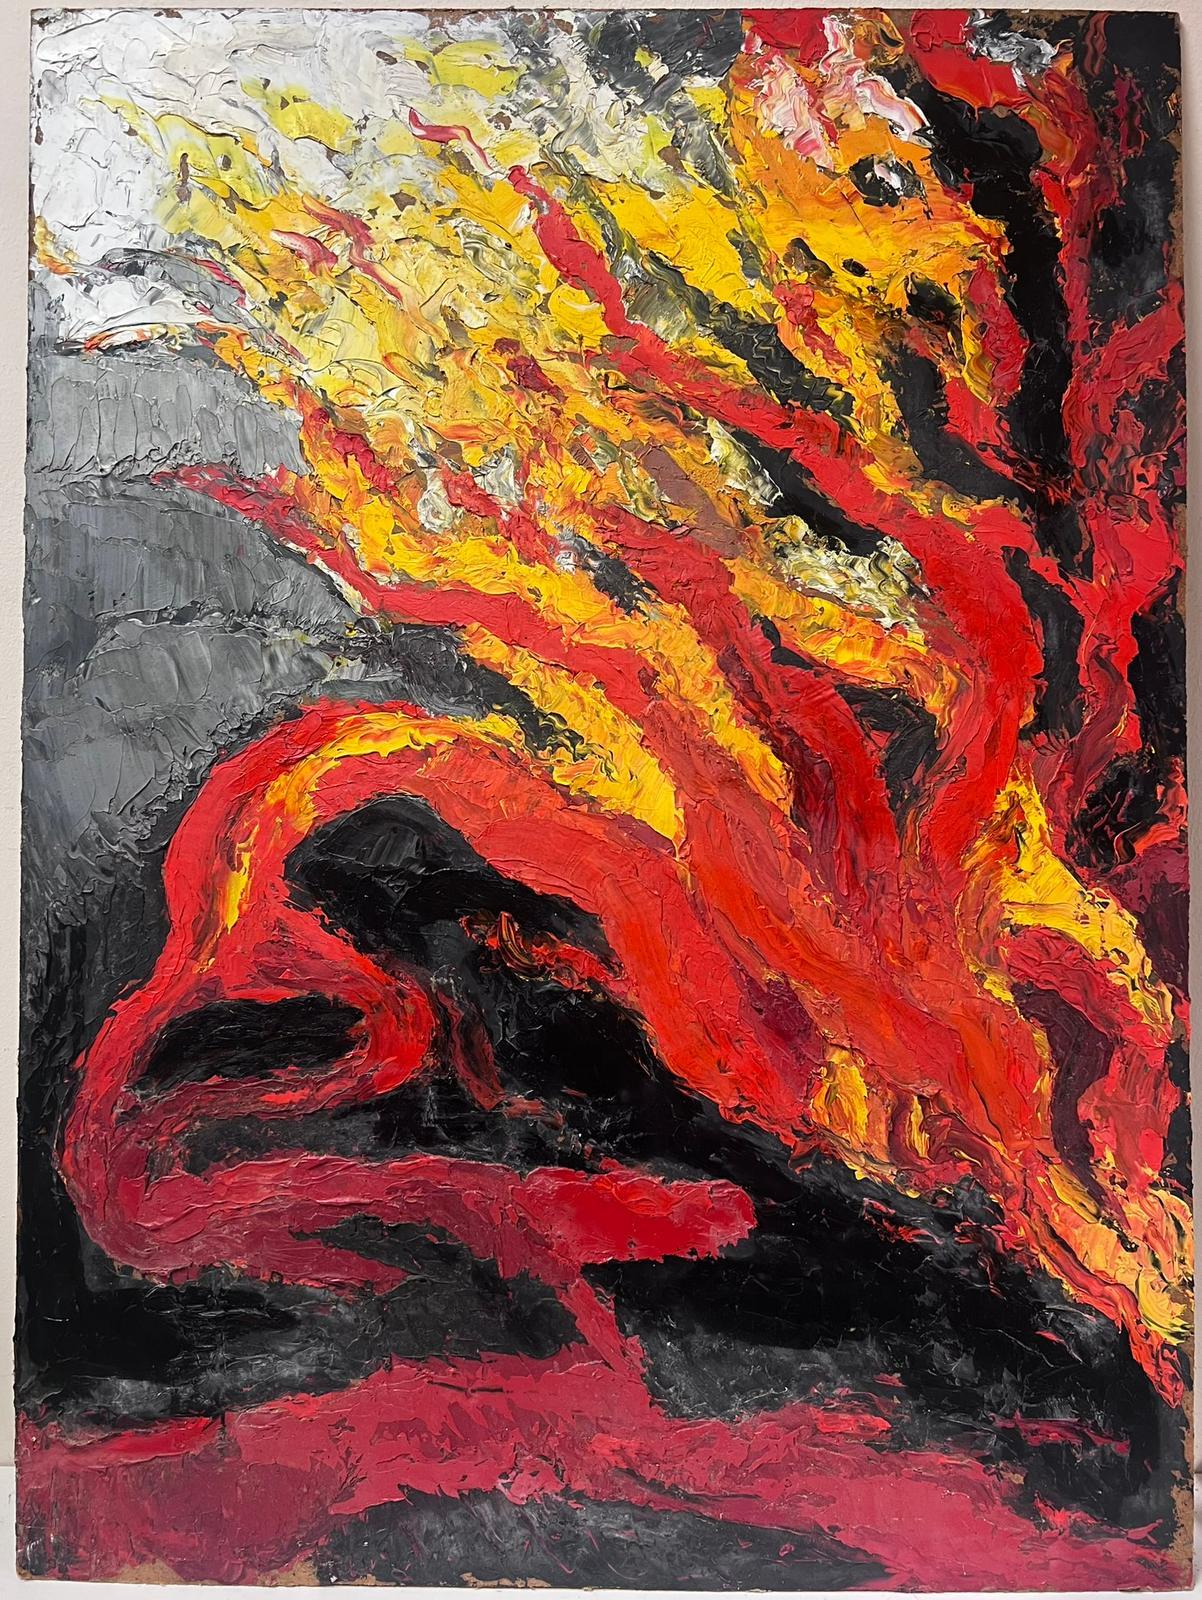 French School, circa 1970's
Expressionist blaze of colors
oil on board, unframed
board: 29 x 21 inches
provenance: private collection
condition: very good and sound condition 